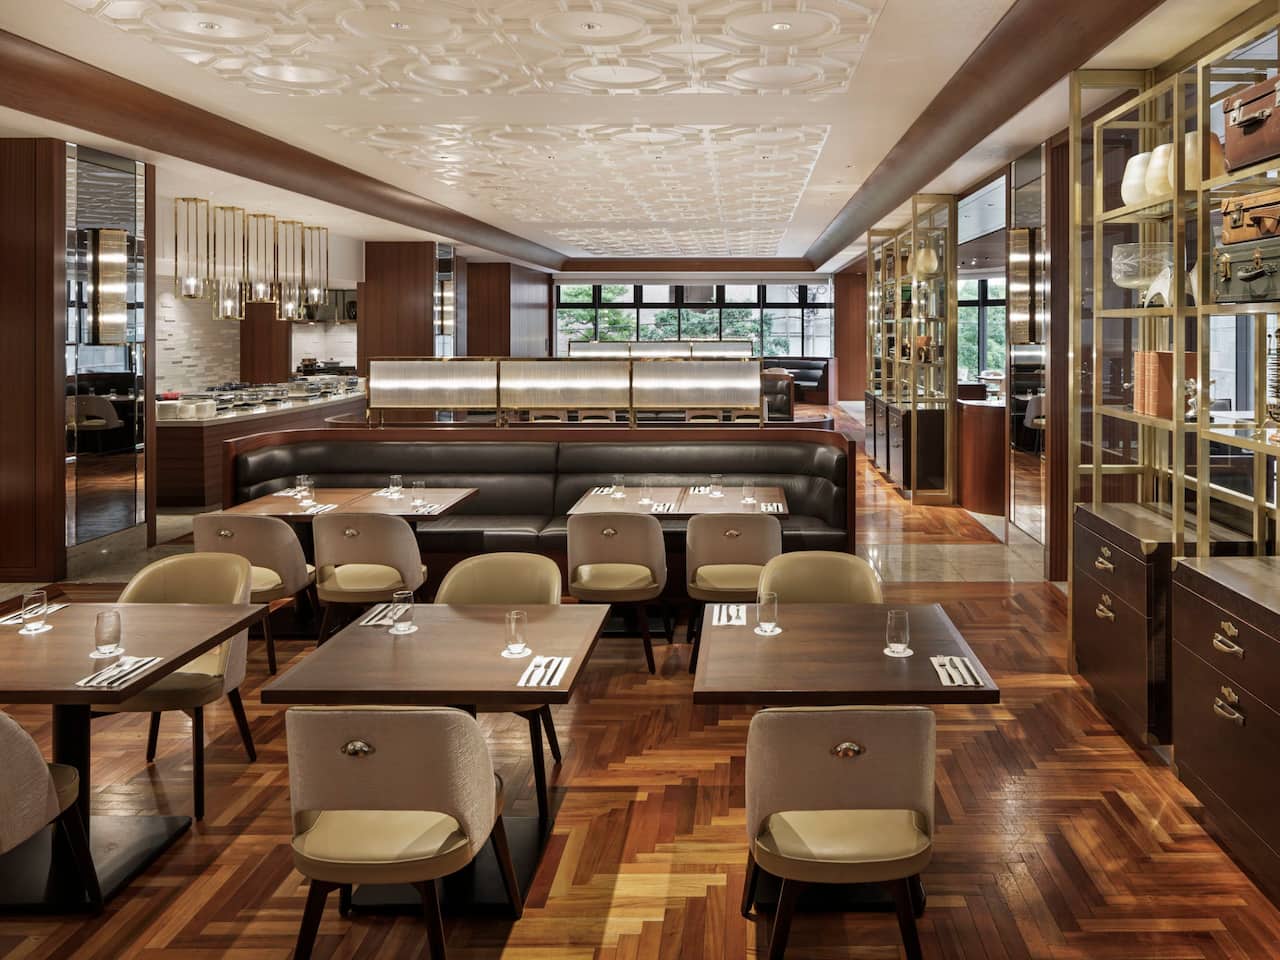 The interior of Harbor Kitchen inspired by a luxury cruise ship.